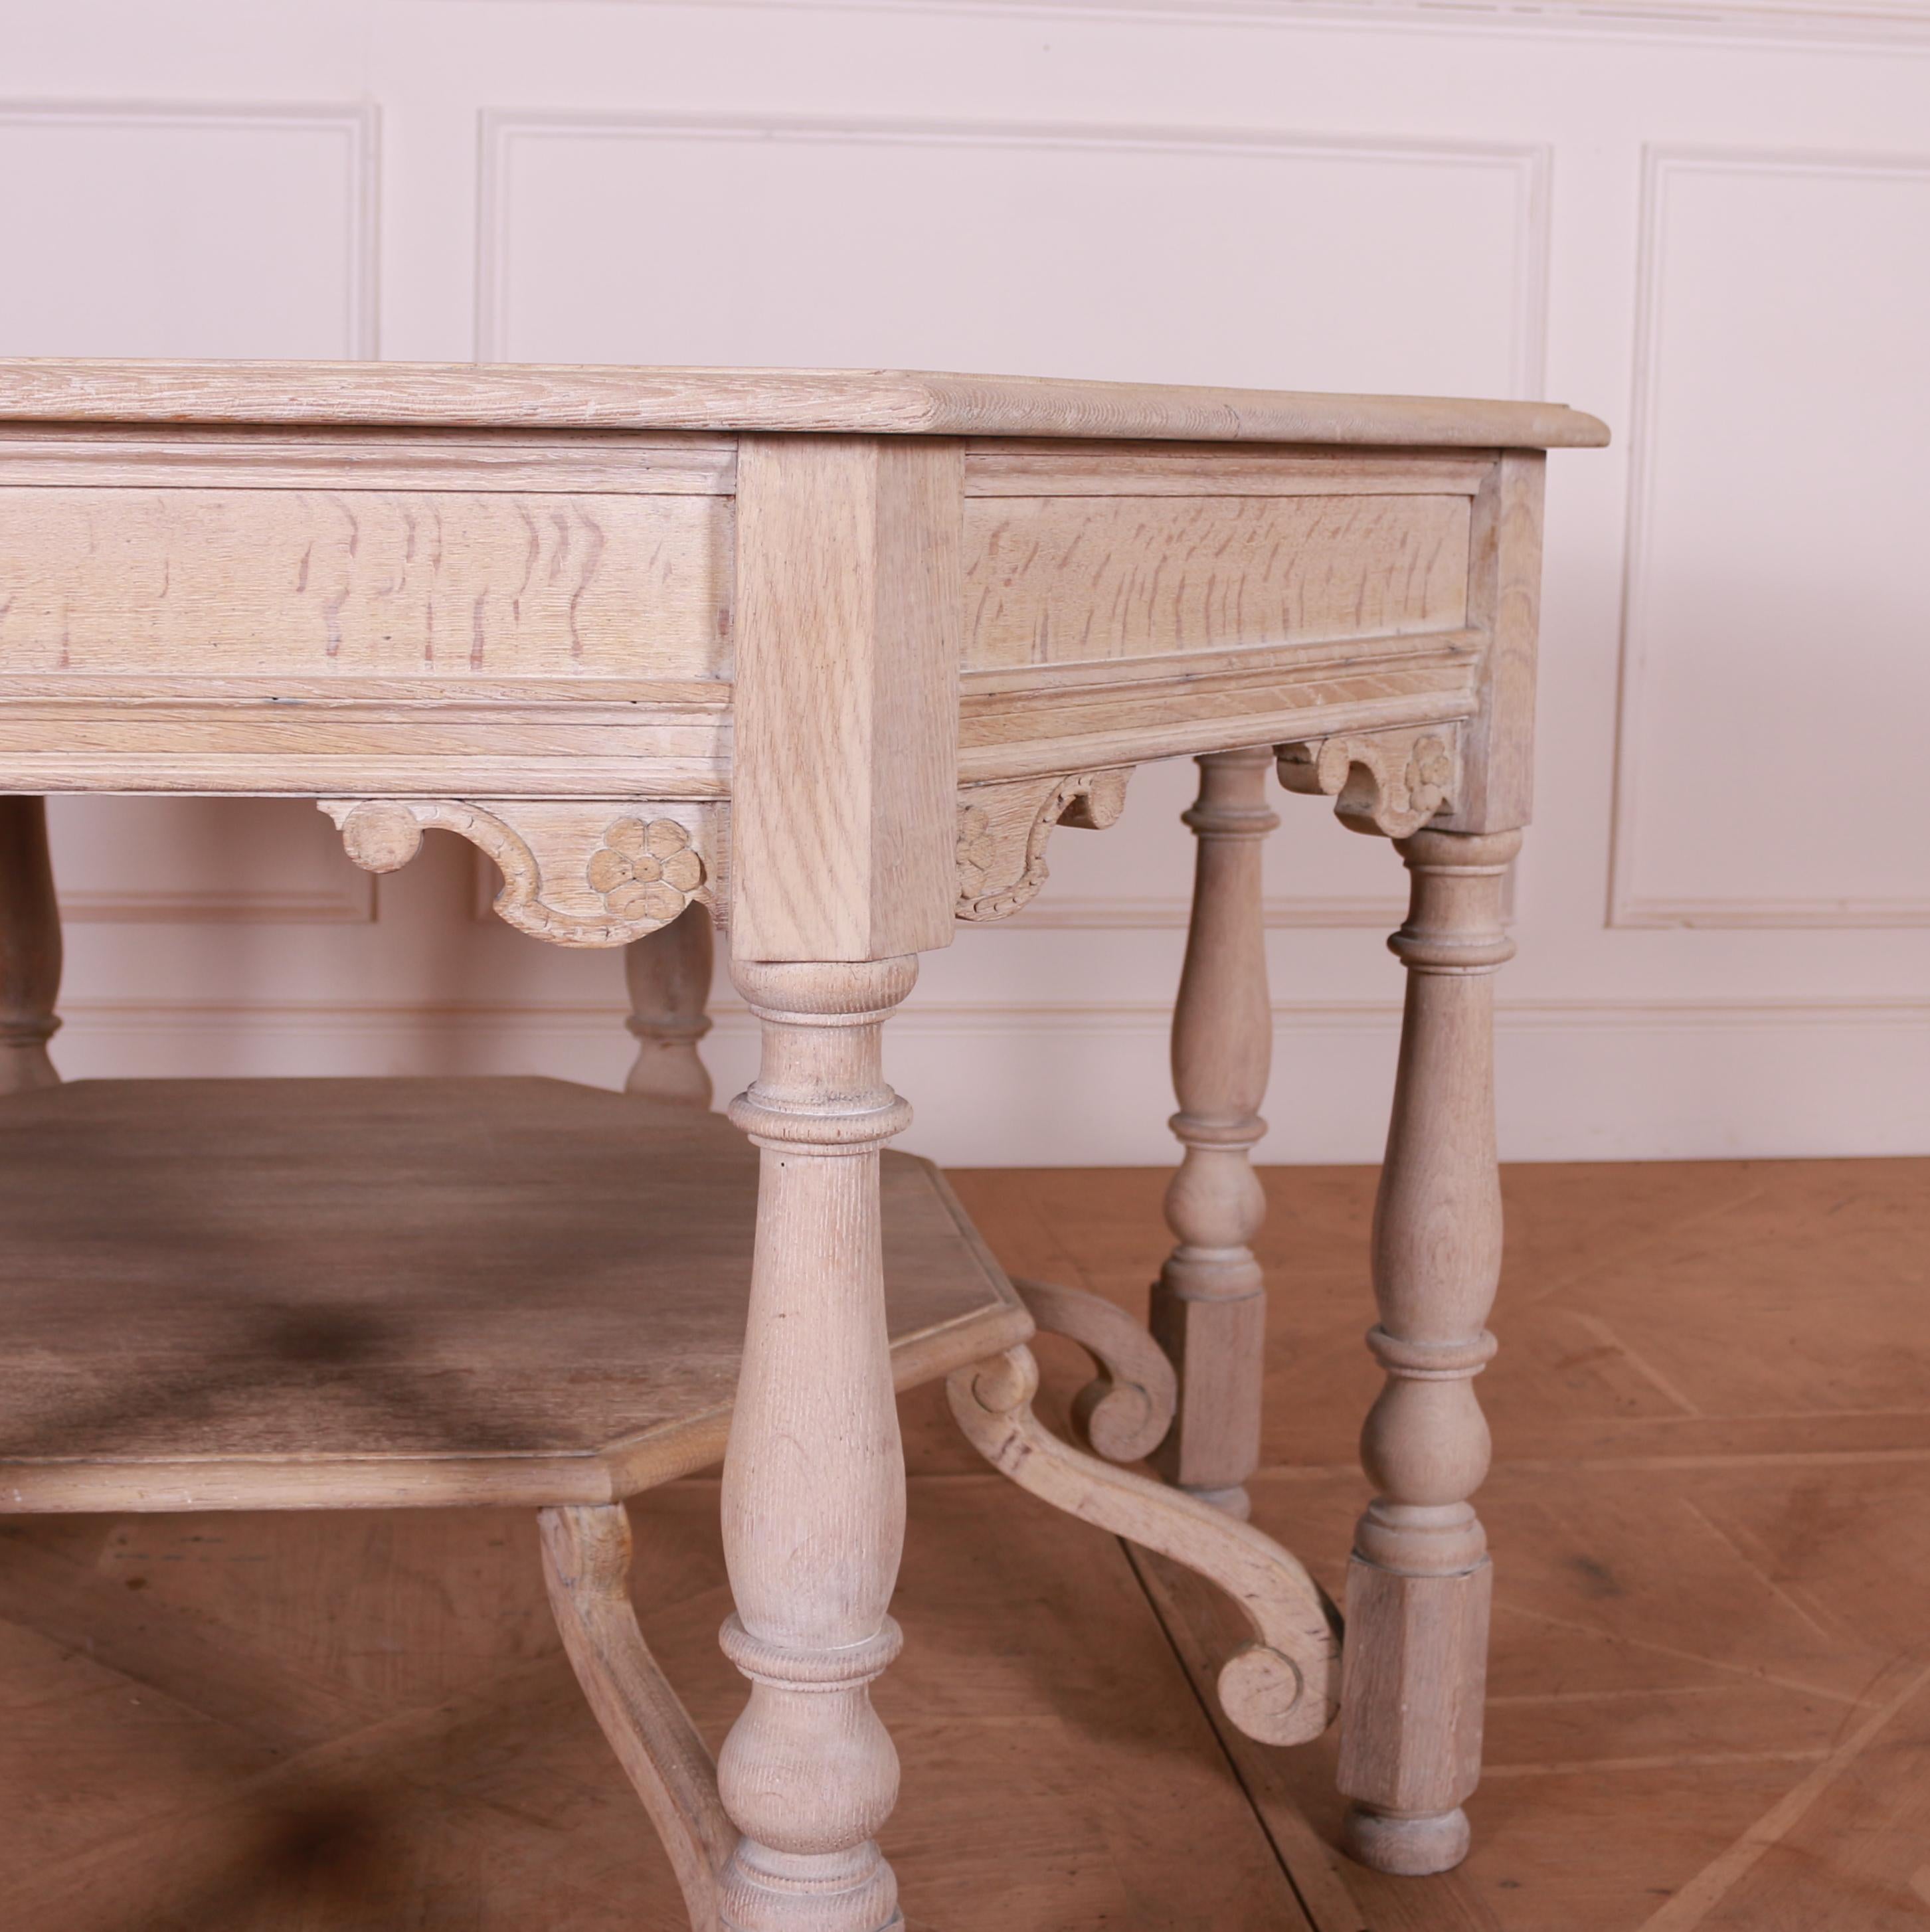 Large bleached oak centre table. 1880.

Reference: 7658

Dimensions
30 inches (76 cms) High
56 inches (142 cms) Diameter